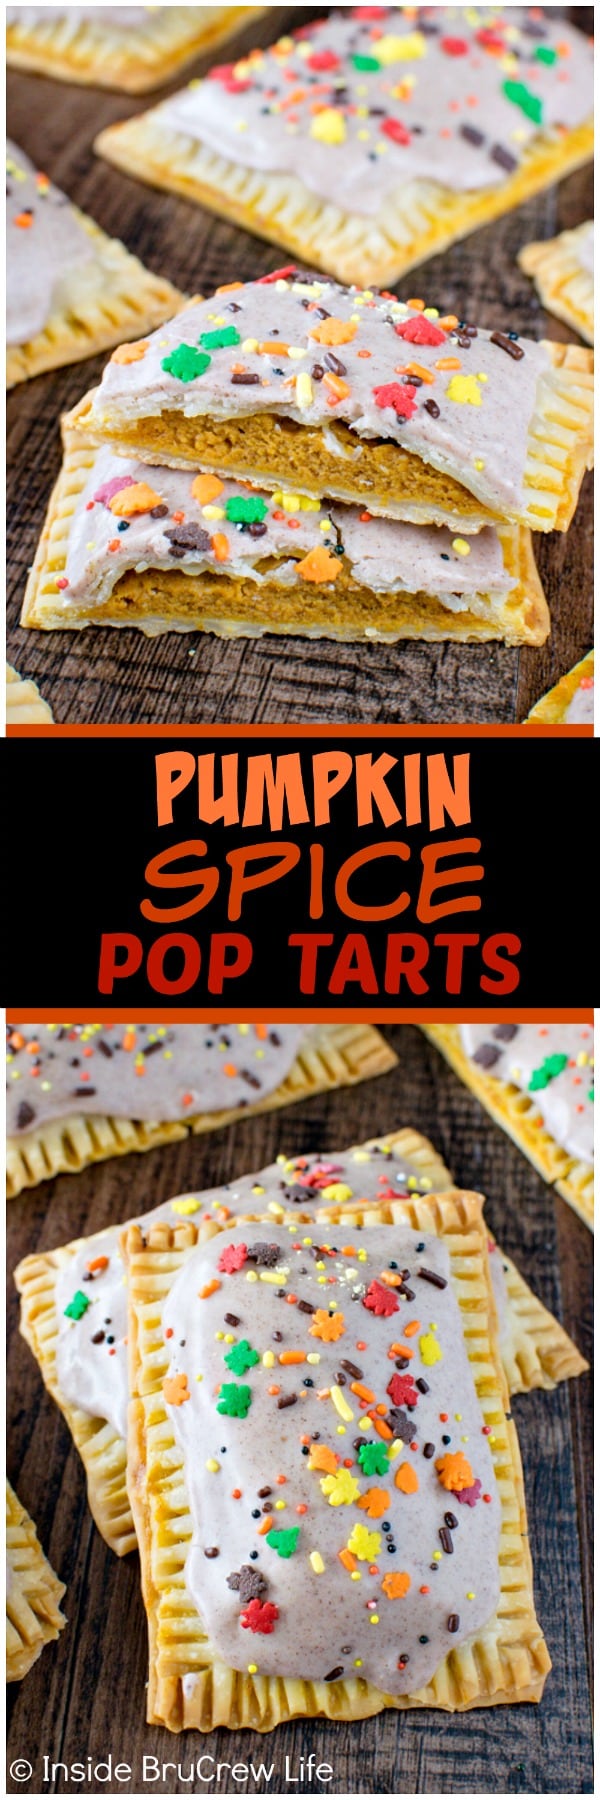 Pumpkin Spice Pop Tarts - use pie crusts to make your own homemade breakfast pastries. These easy tarts are full of pumpkin and spice goodness. Great fall breakfast!